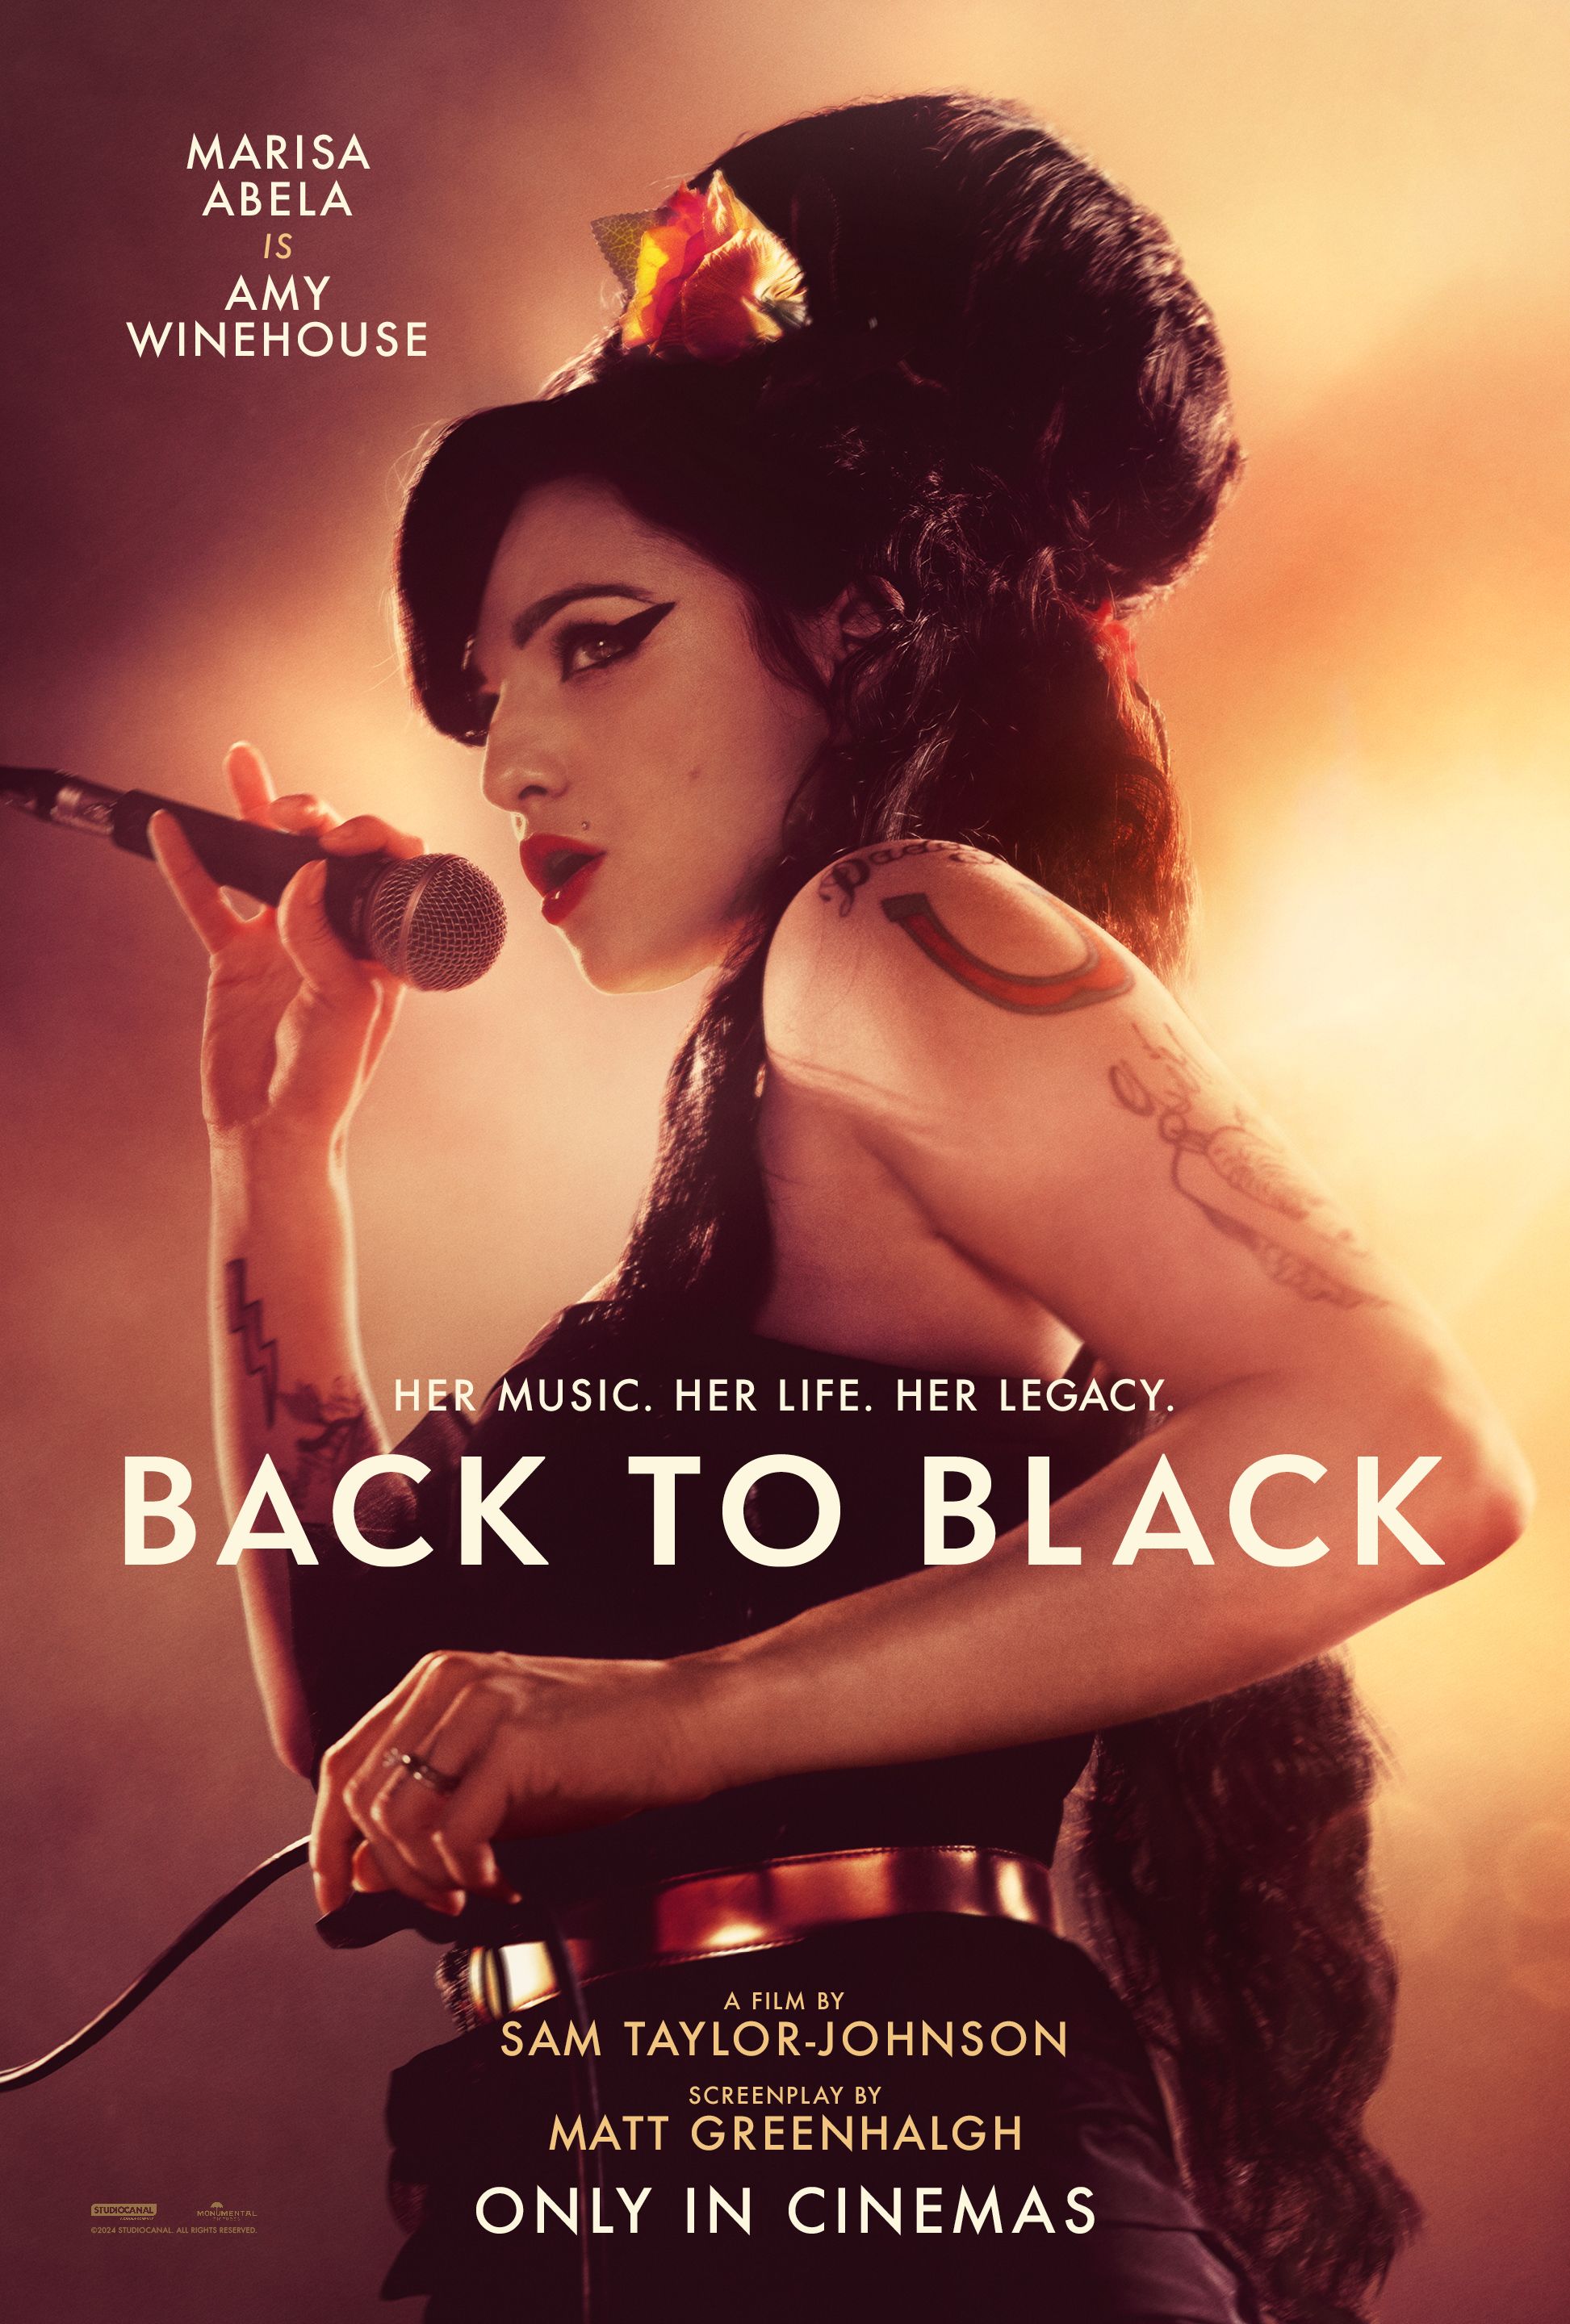 Where To Watch ‘Back to Black’: Find Showtimes for the Controversial Amy Winehouse Biopic